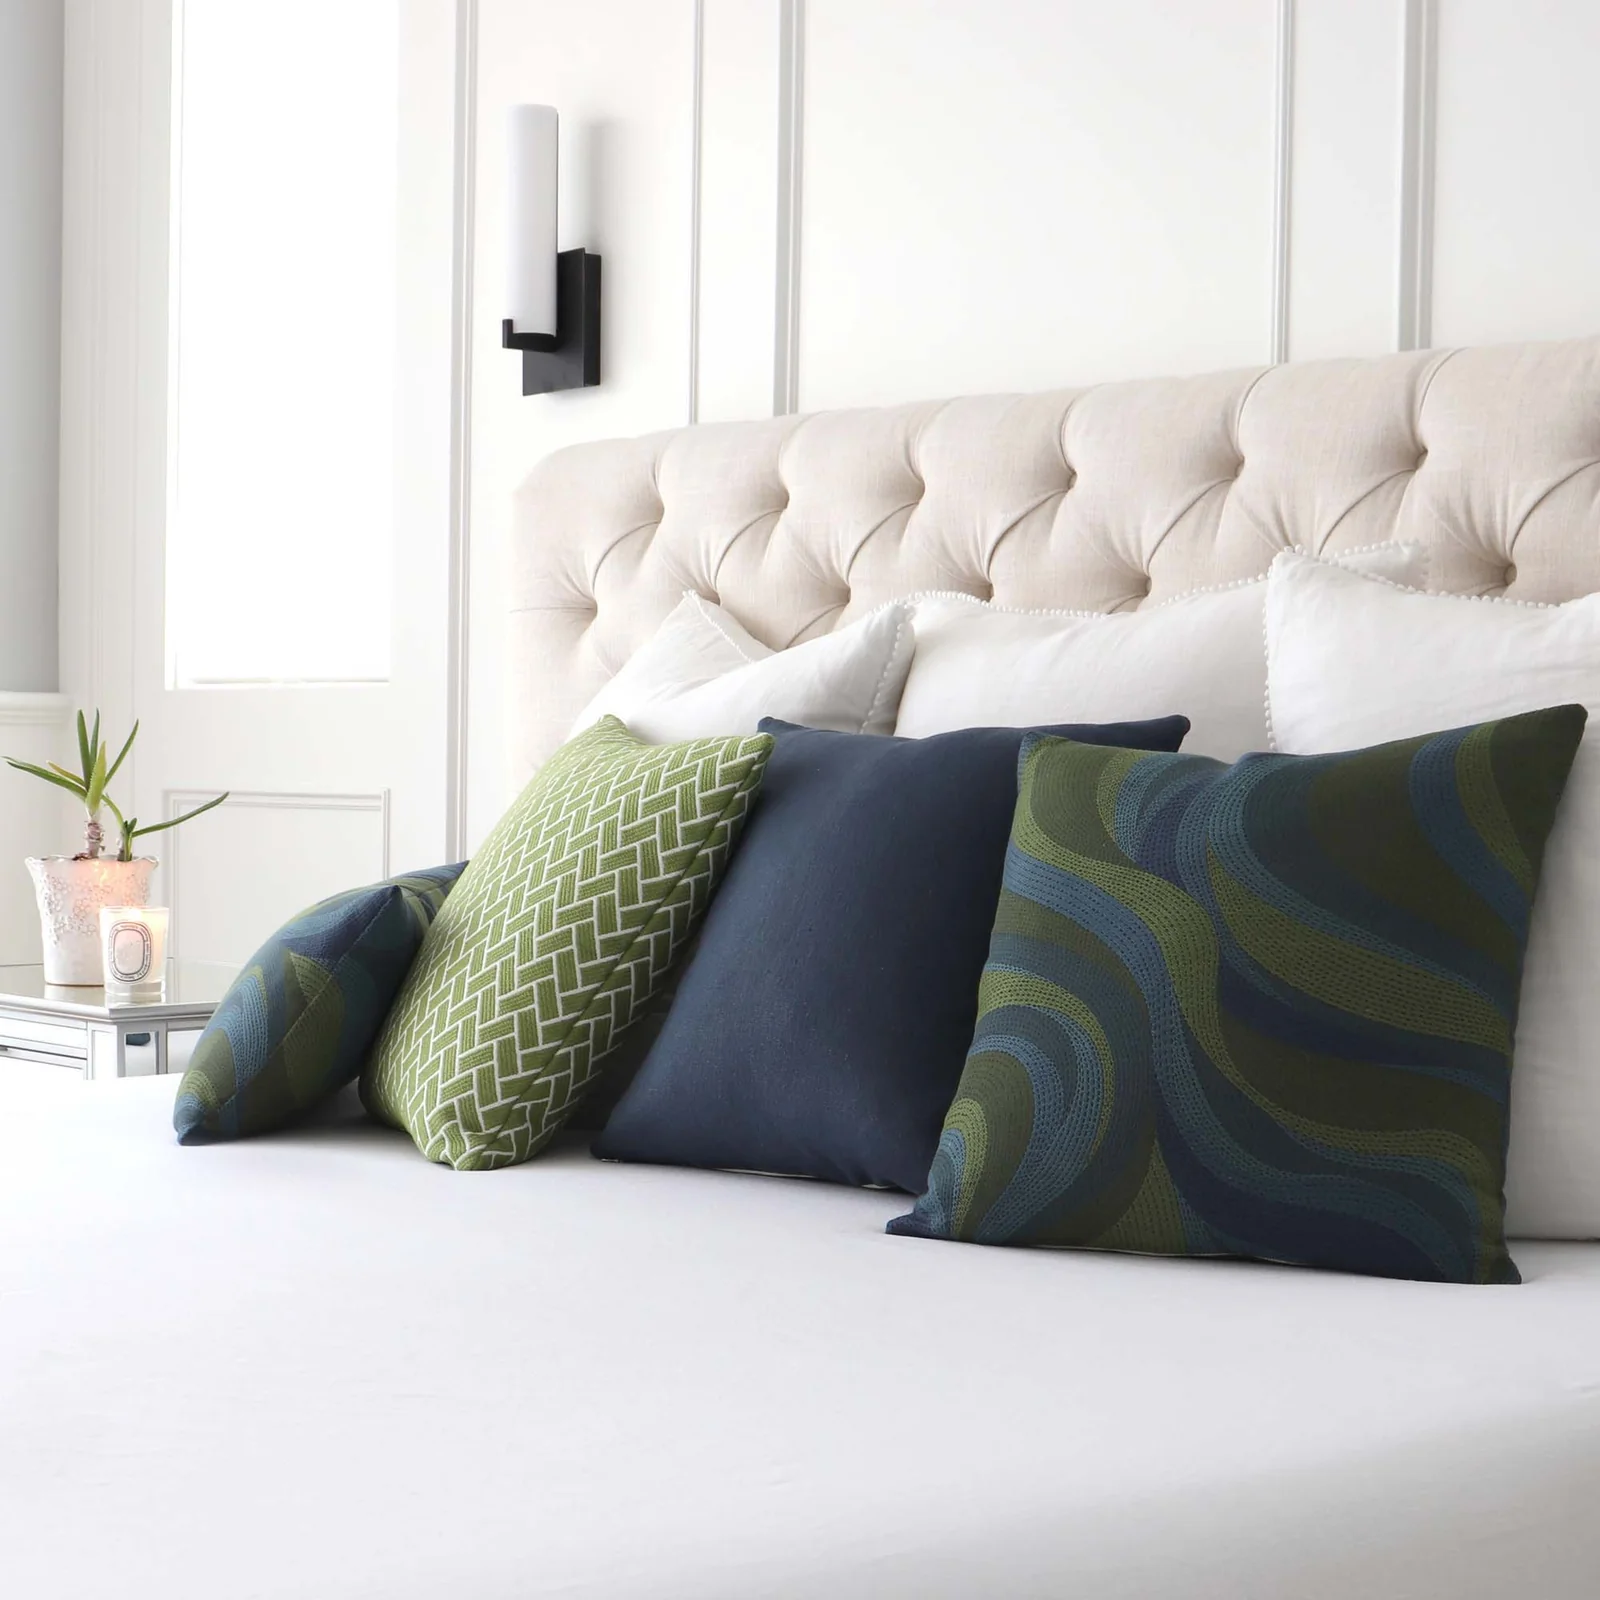 Why Boutique Pillow Covers are Better